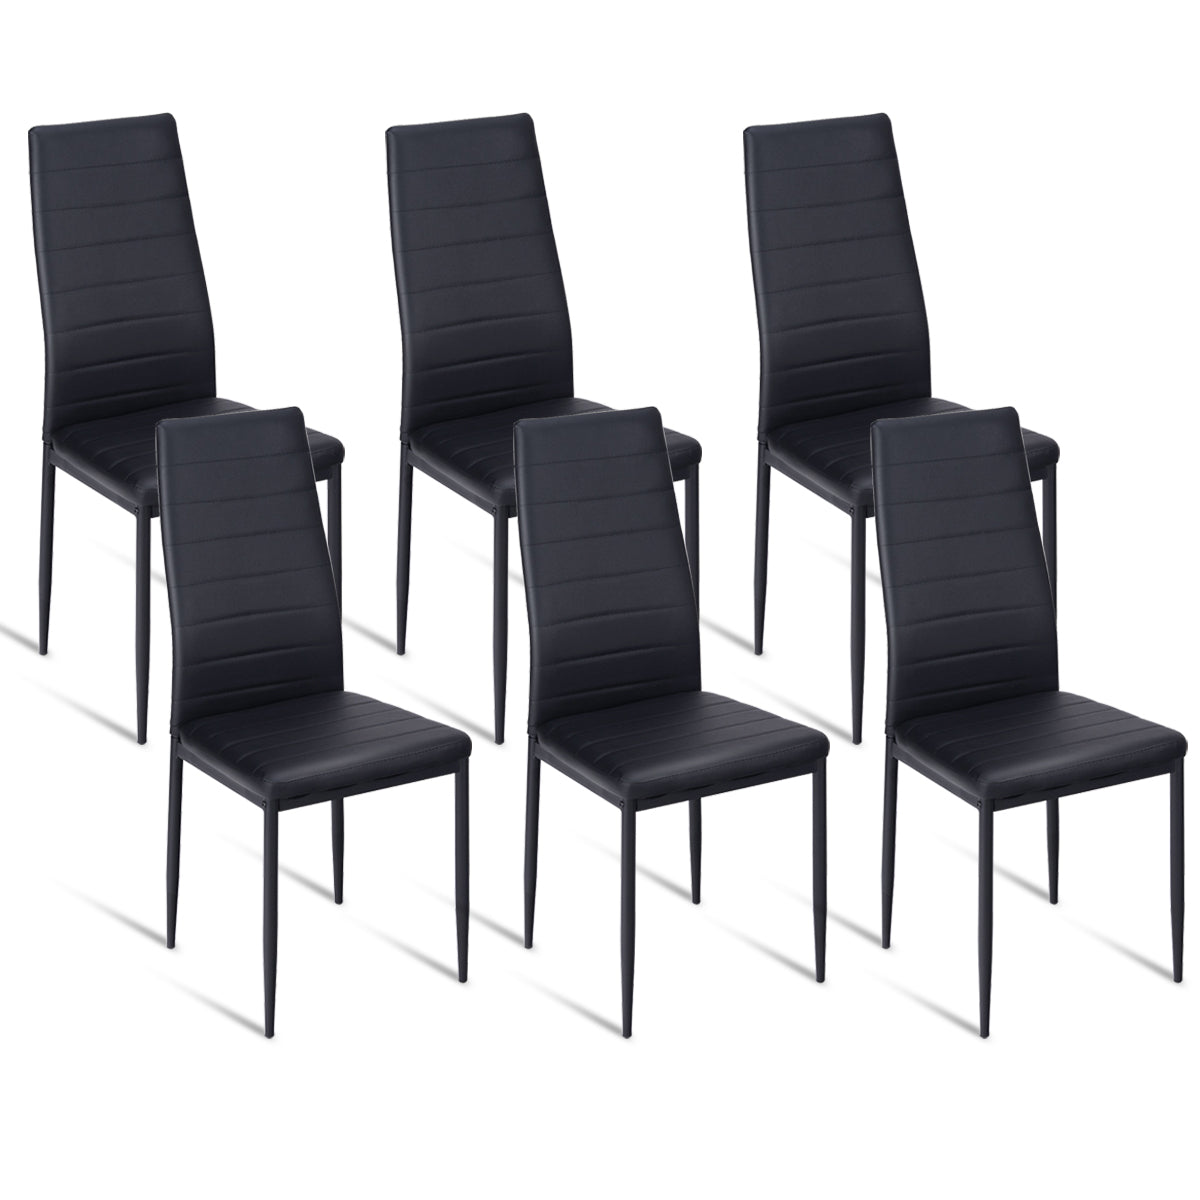 Giantex Set of 6 Dining Chairs